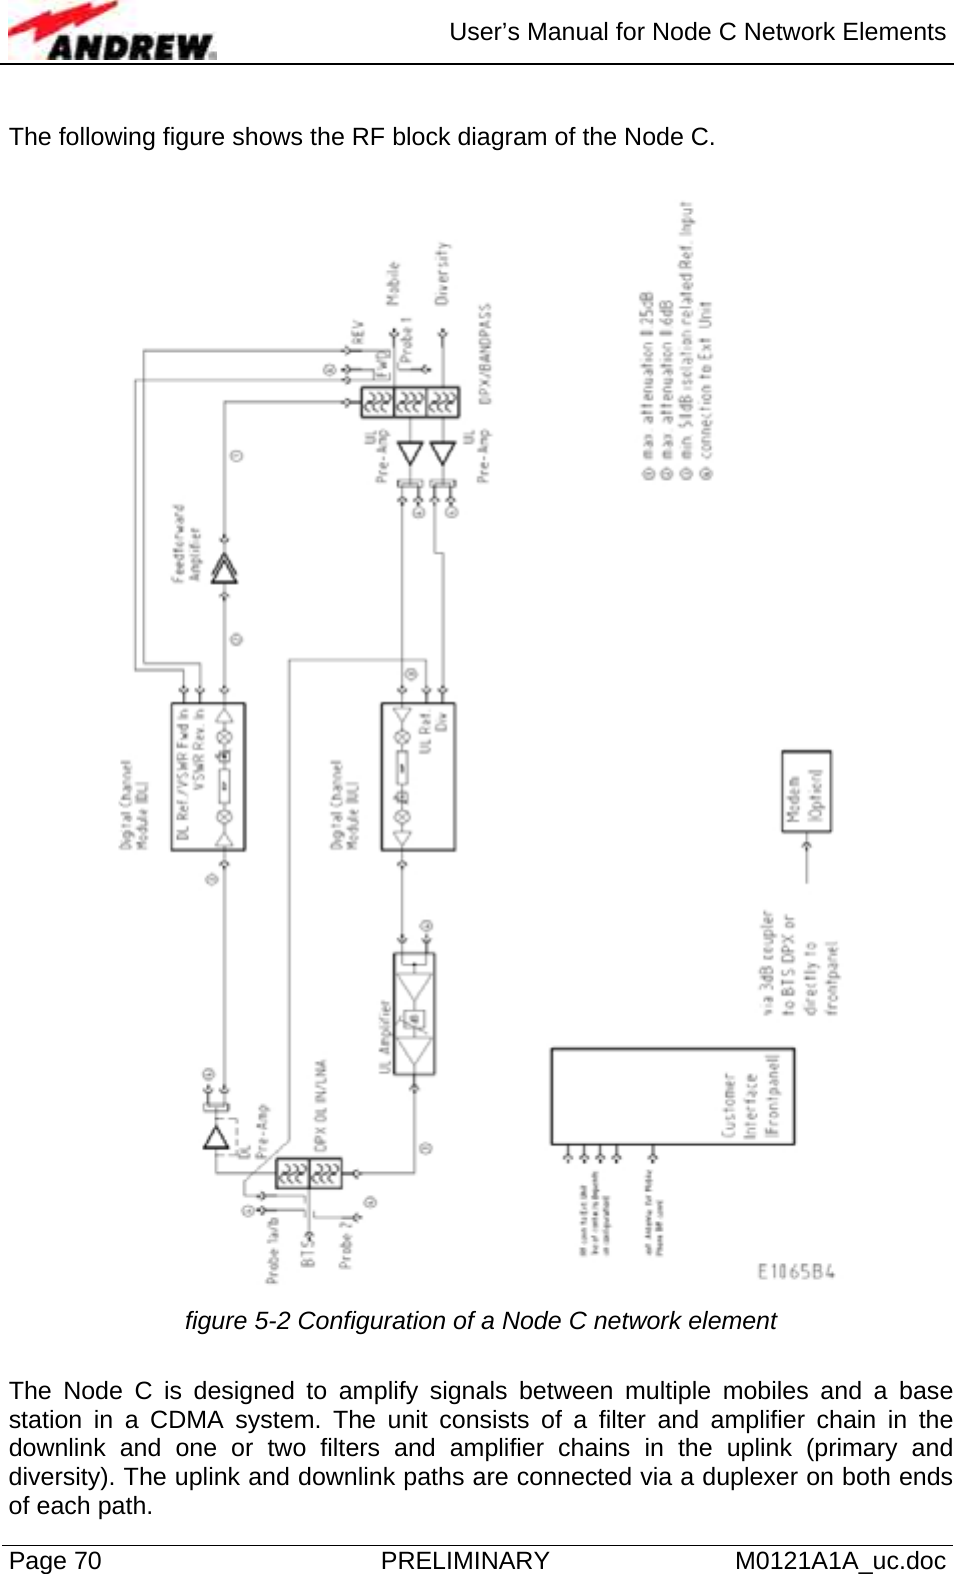  User’s Manual for Node C Network Elements Page 70  PRELIMINARY M0121A1A_uc.doc  The following figure shows the RF block diagram of the Node C.   figure 5-2 Configuration of a Node C network element  The Node C is designed to amplify signals between multiple mobiles and a base station in a CDMA system. The unit consists of a filter and amplifier chain in the downlink and one or two filters and amplifier chains in the uplink (primary and diversity). The uplink and downlink paths are connected via a duplexer on both ends of each path.  